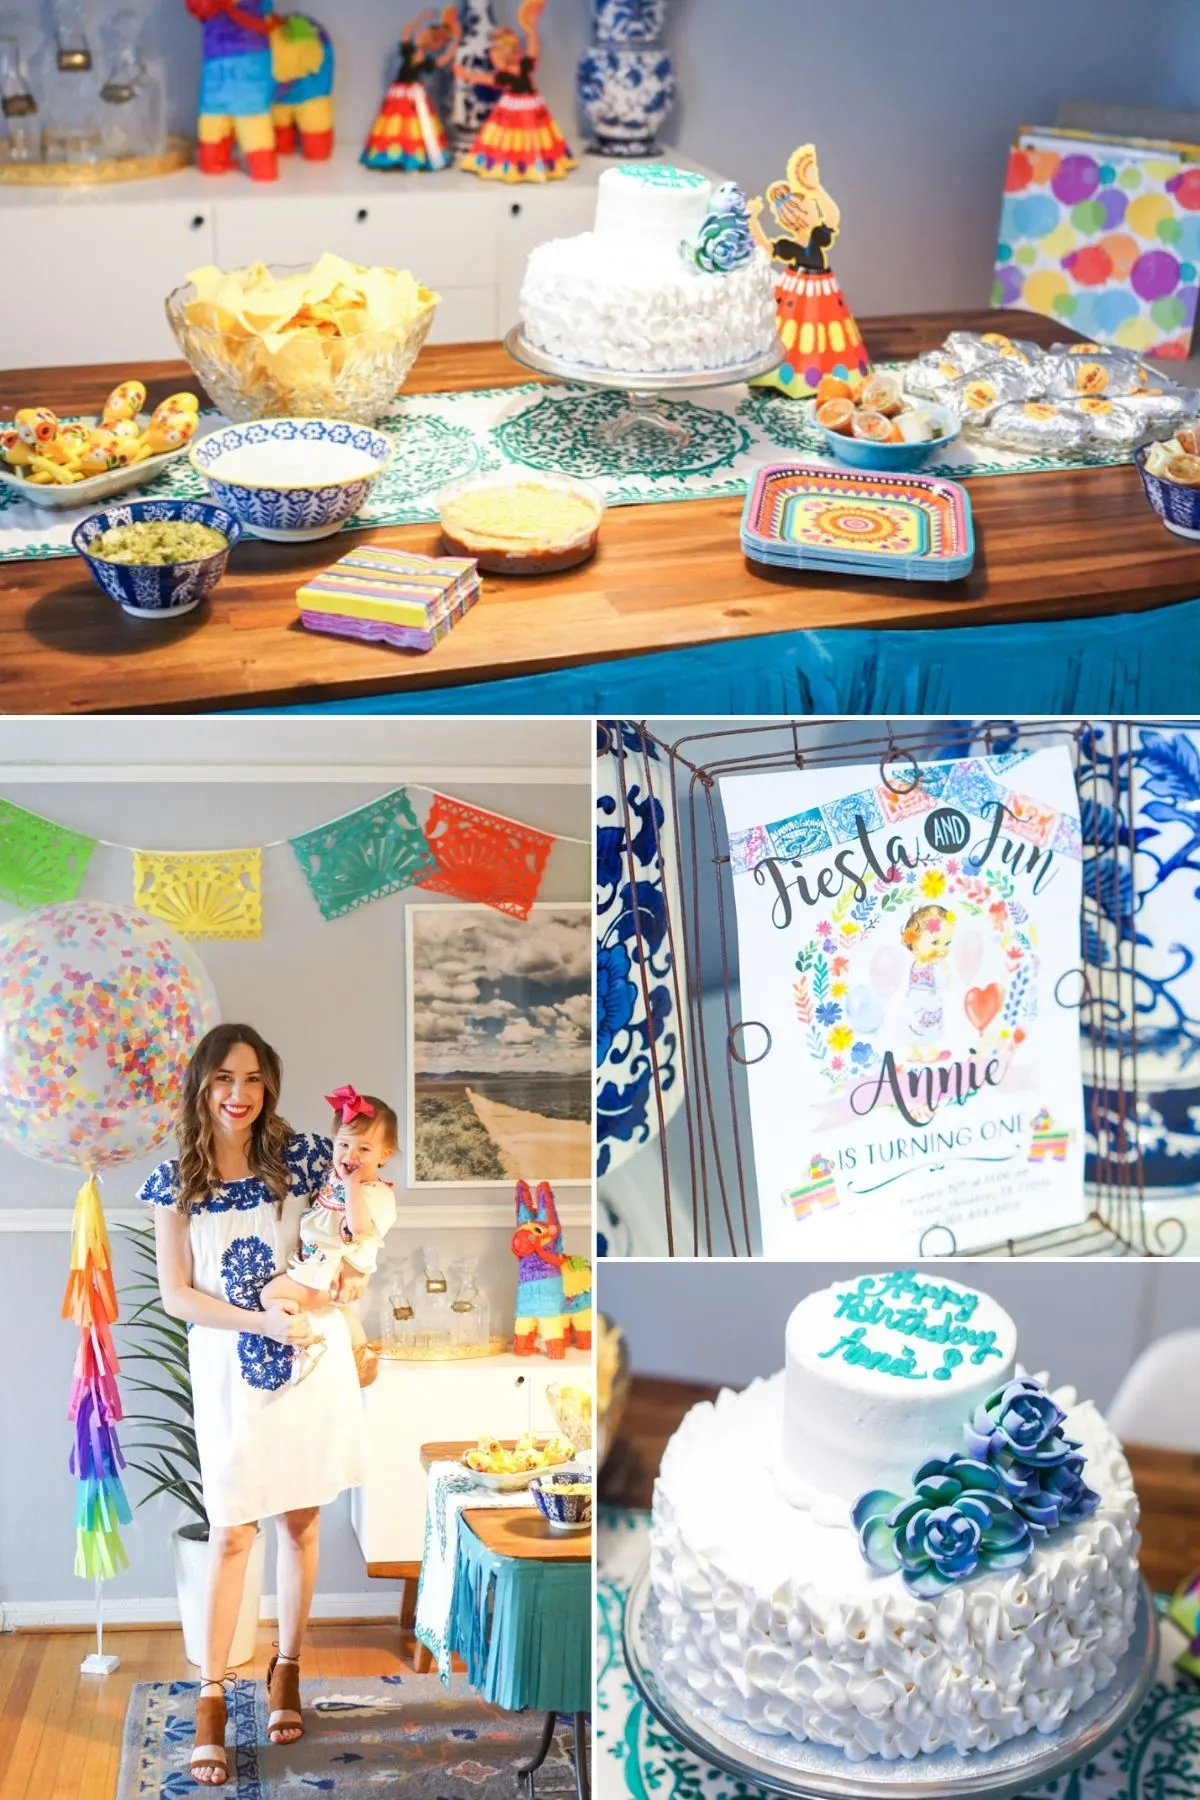 Collage of photos from fiesta first birthday party including food table, decorations, and cake.